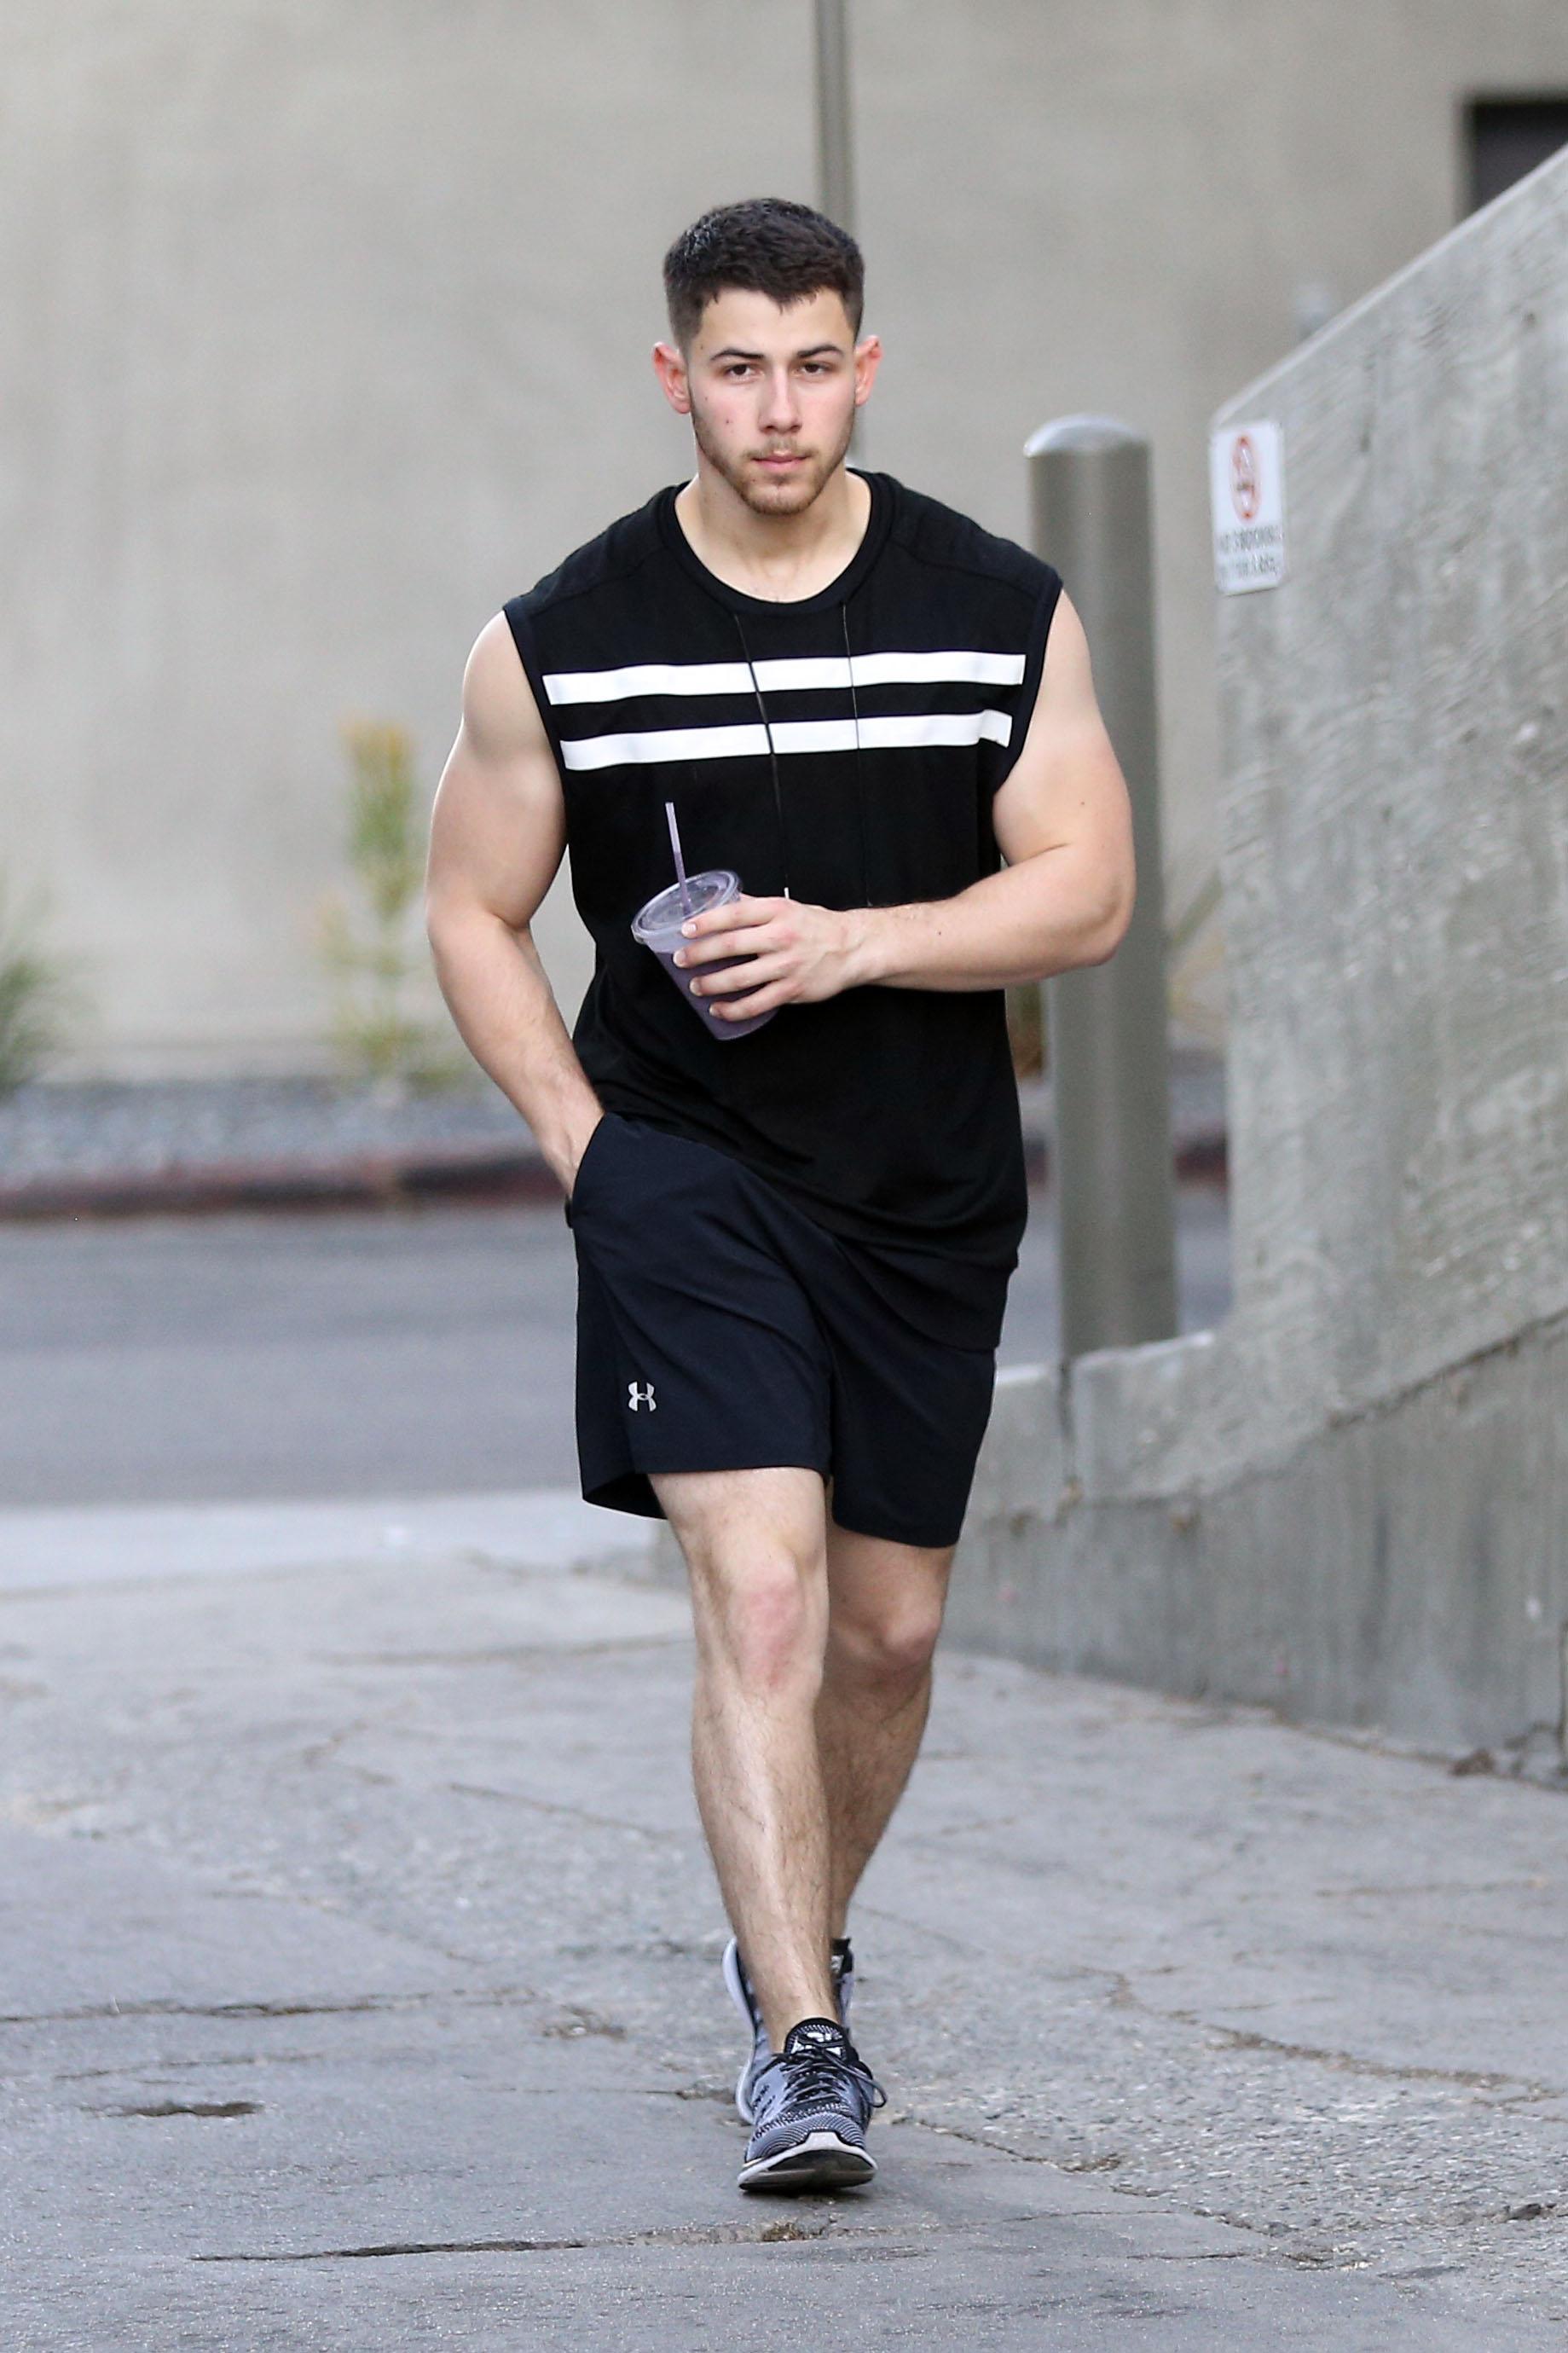 [Nick Jonas'] Insane Muscles Will Leave You Speechless